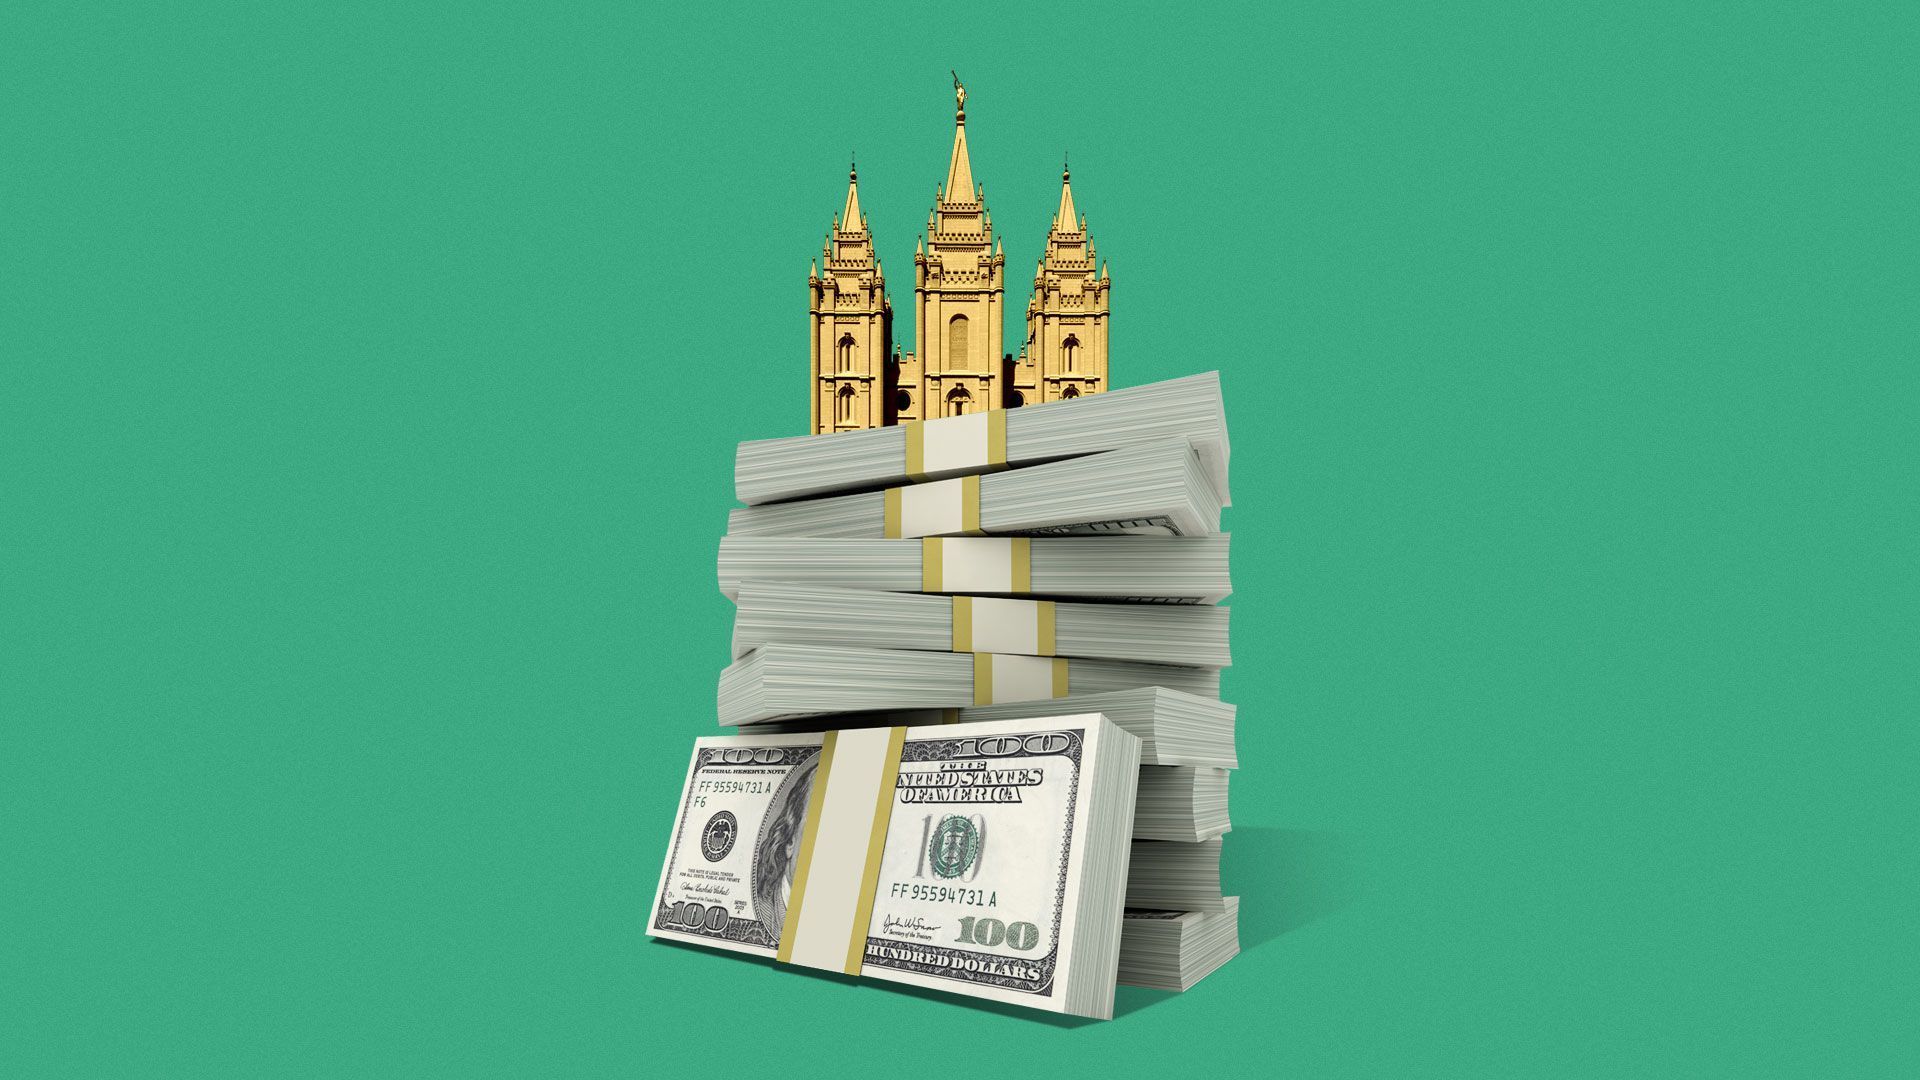 Illustration of the Mormon Church on a pile of money